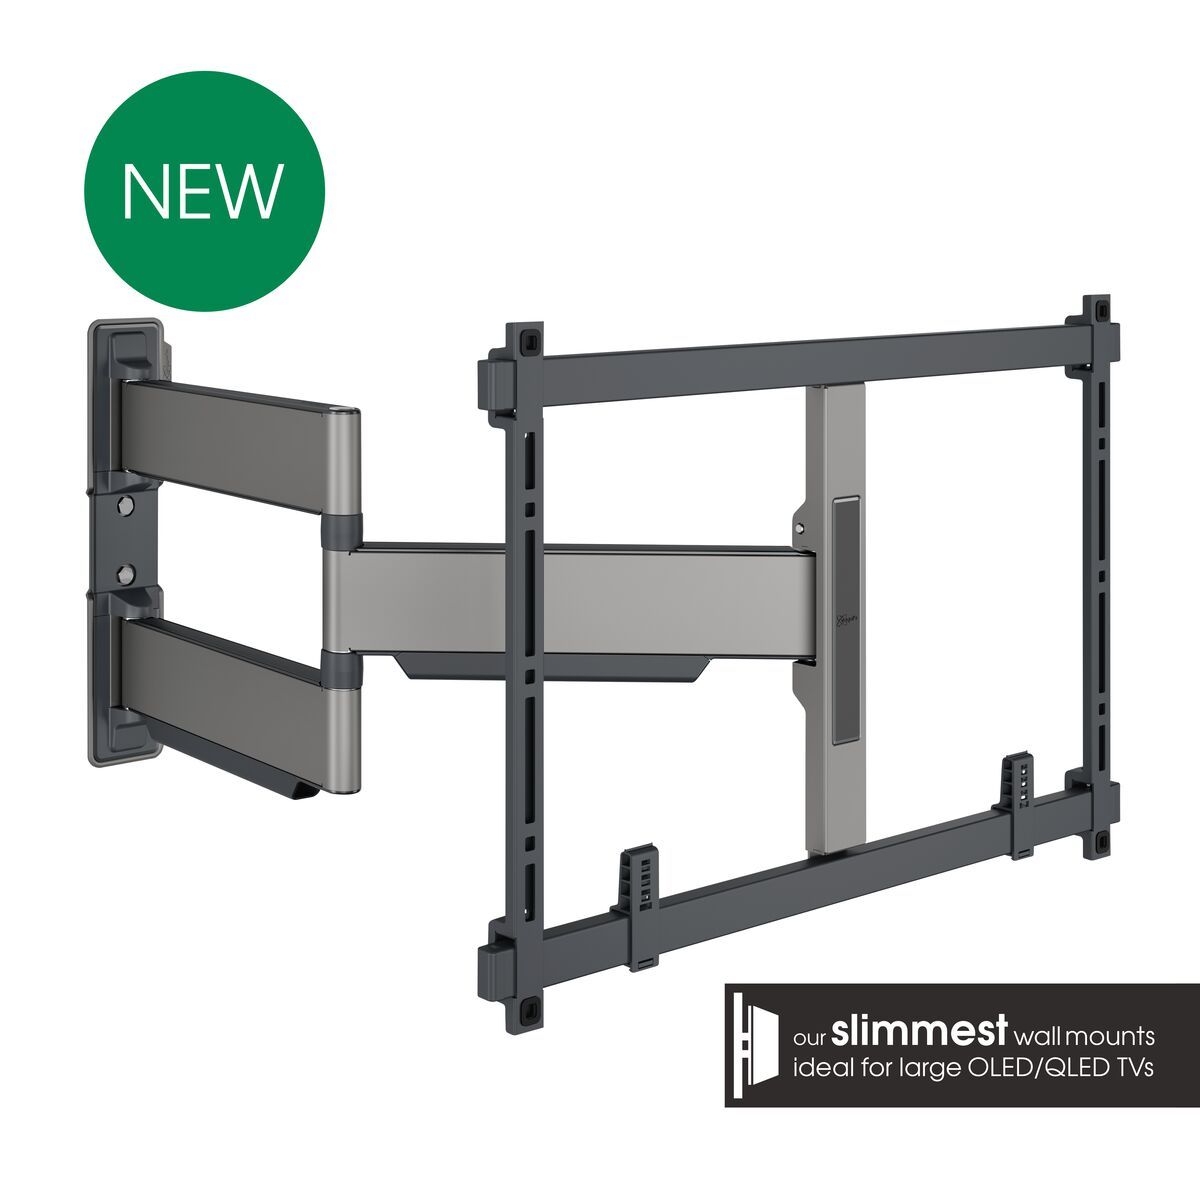 Vogel's TVM 5645 Full-Motion TV Wall Mount (black) - Suitable for 40 up to 77 inch TVs - Full motion (up to 180°) swivel - Promo